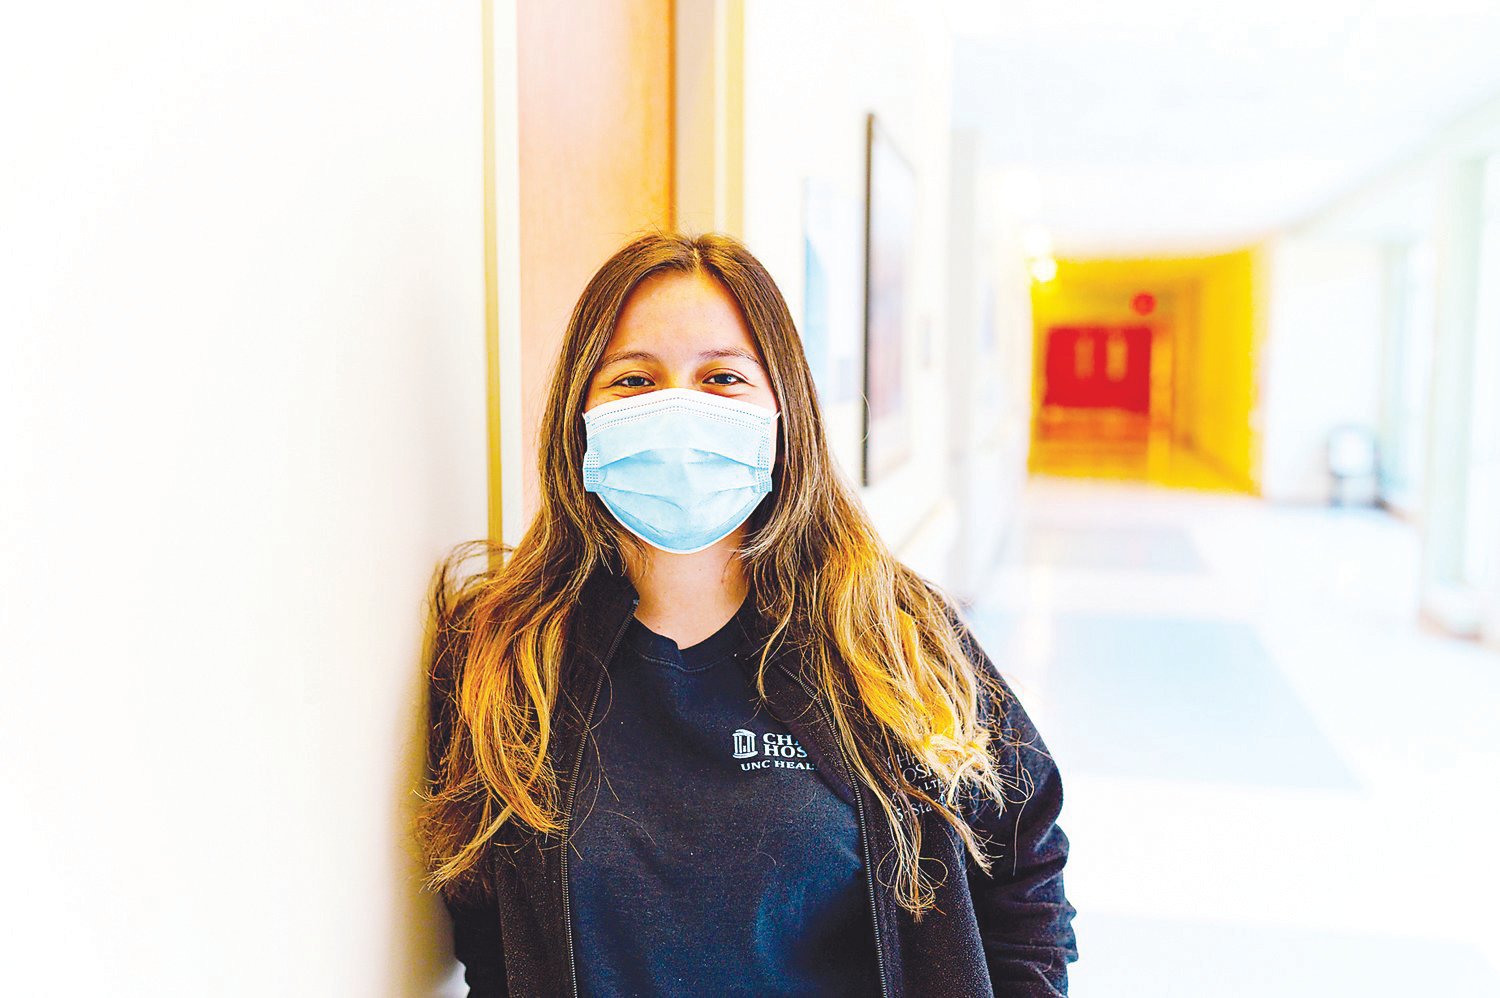 Libdy Lopez, a nursing assistant at Chatham Hospital, pictured last May. 'This past year was very overwhelming. Everything was so new and scary. It was definitely a good experience to see the COVID patients who made it out and go back to their families.'